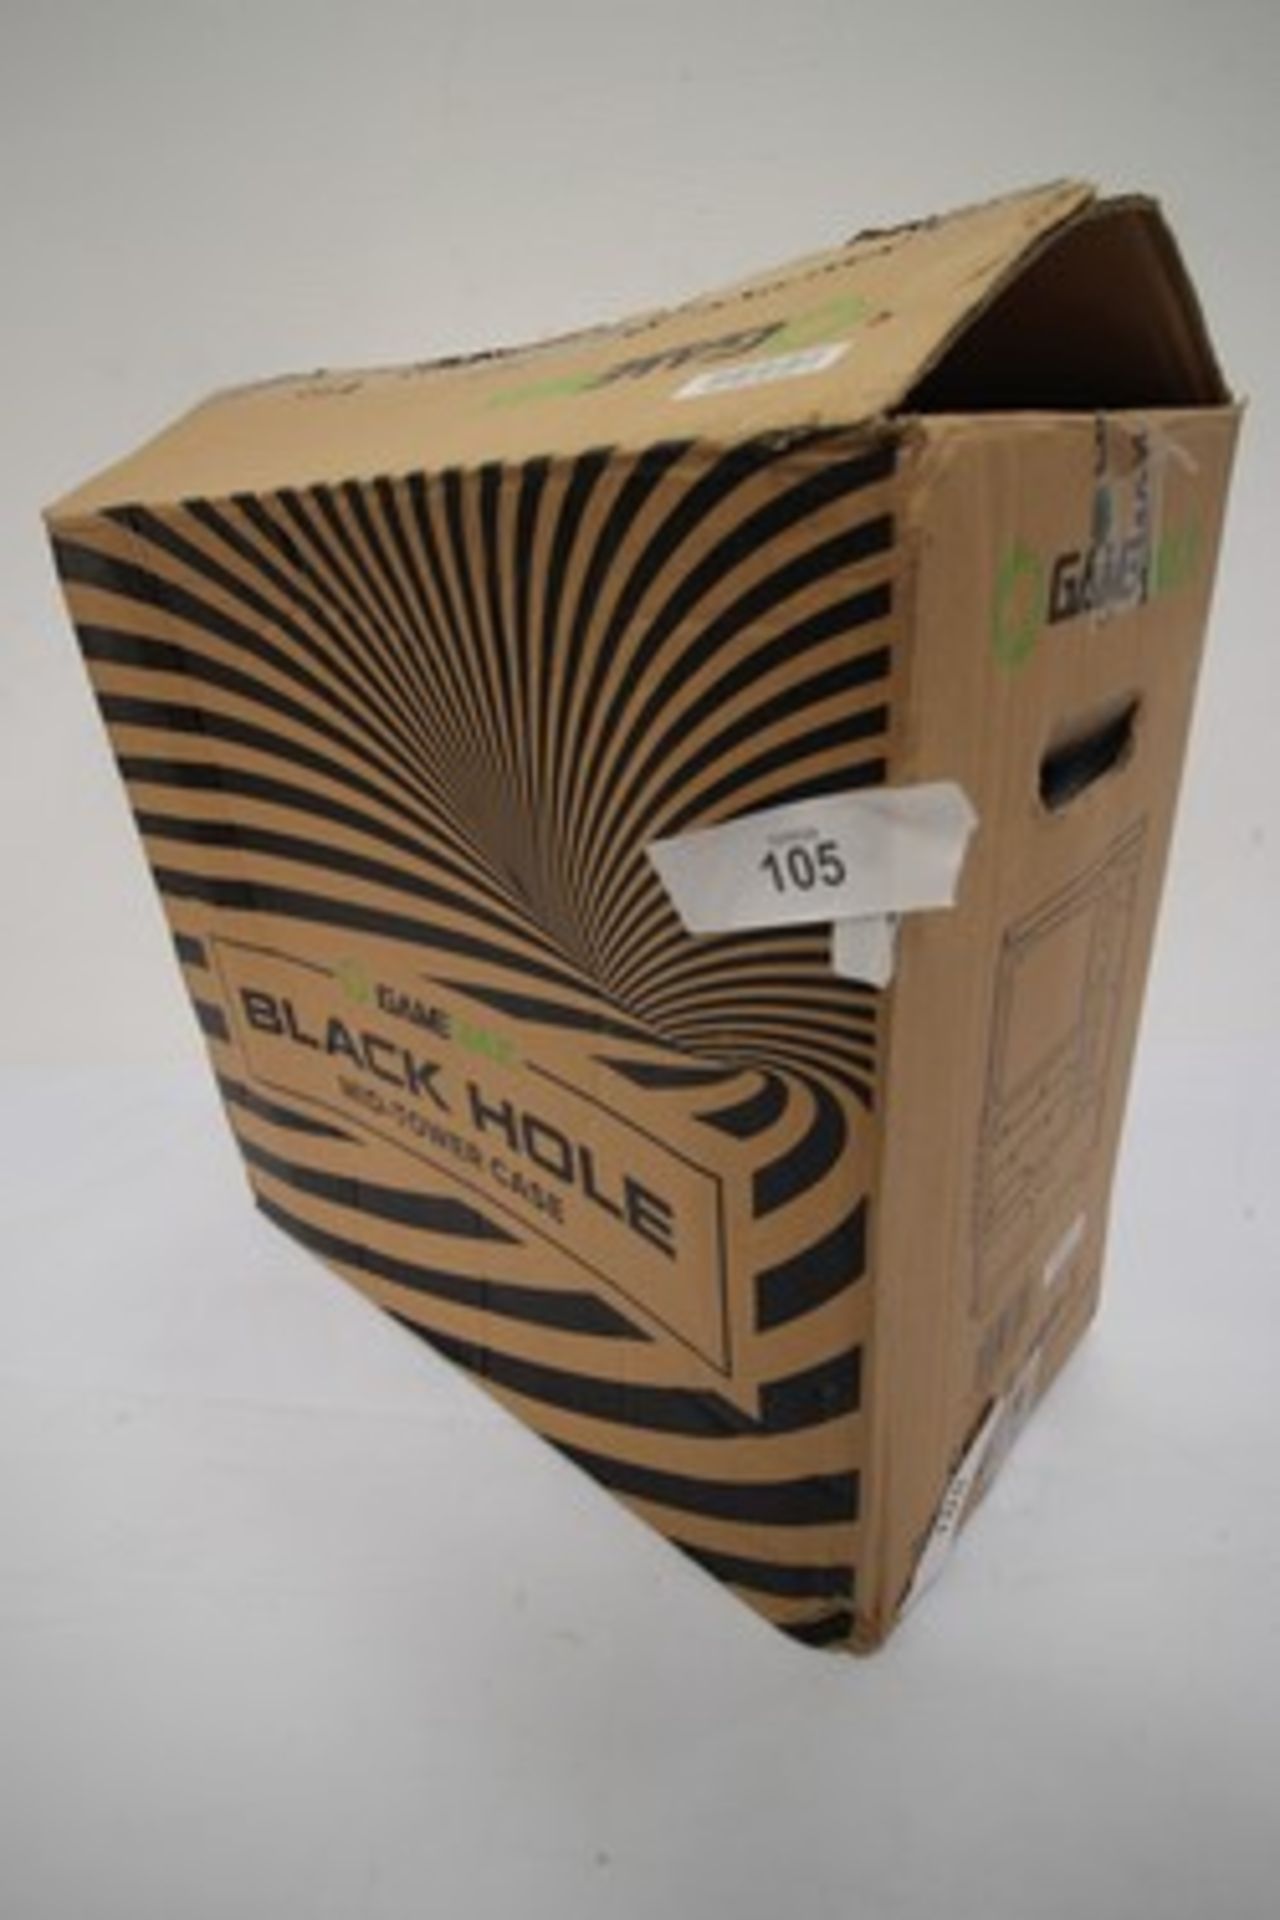 1 x Game Max black hole mid tower PC case, model: 3603-TB - new in box (ES1) - Image 3 of 3